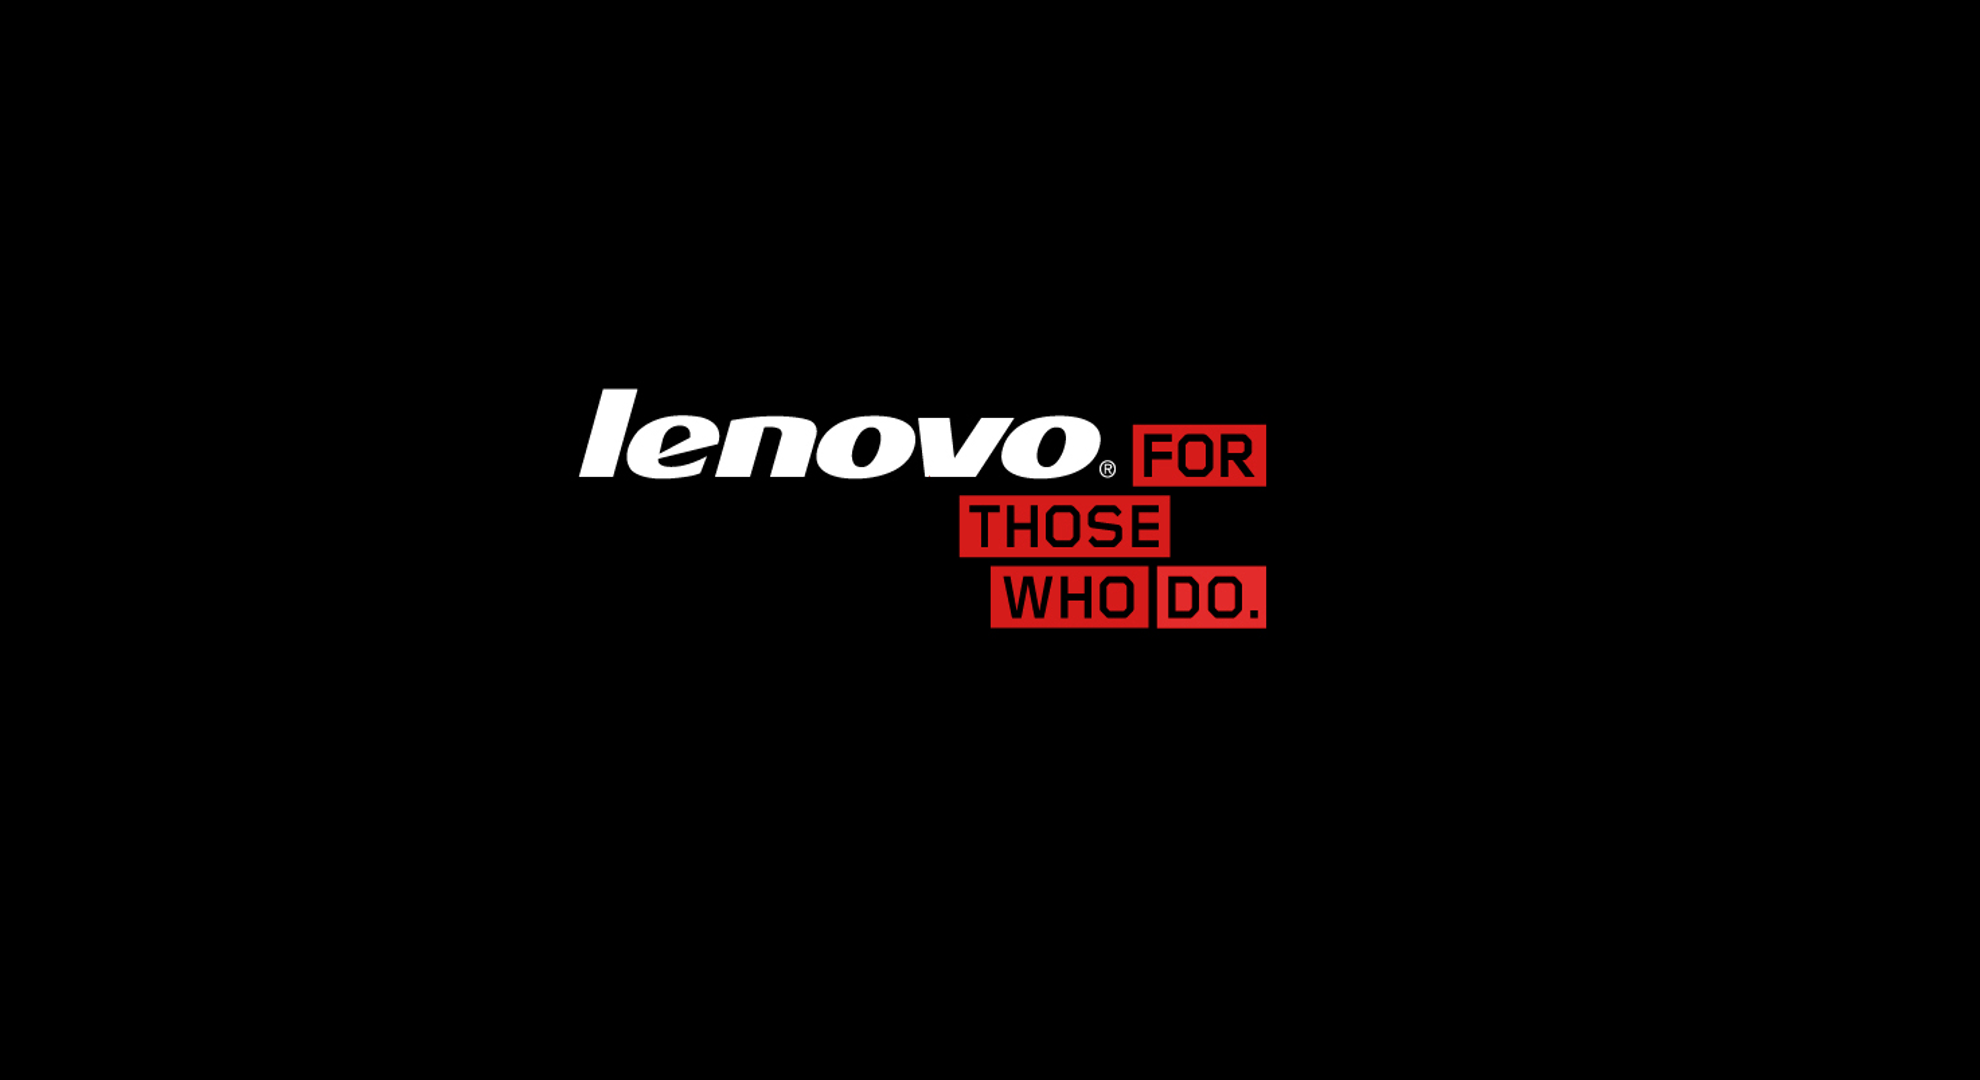 Lenovo Wallpaper Collection in HD for Download